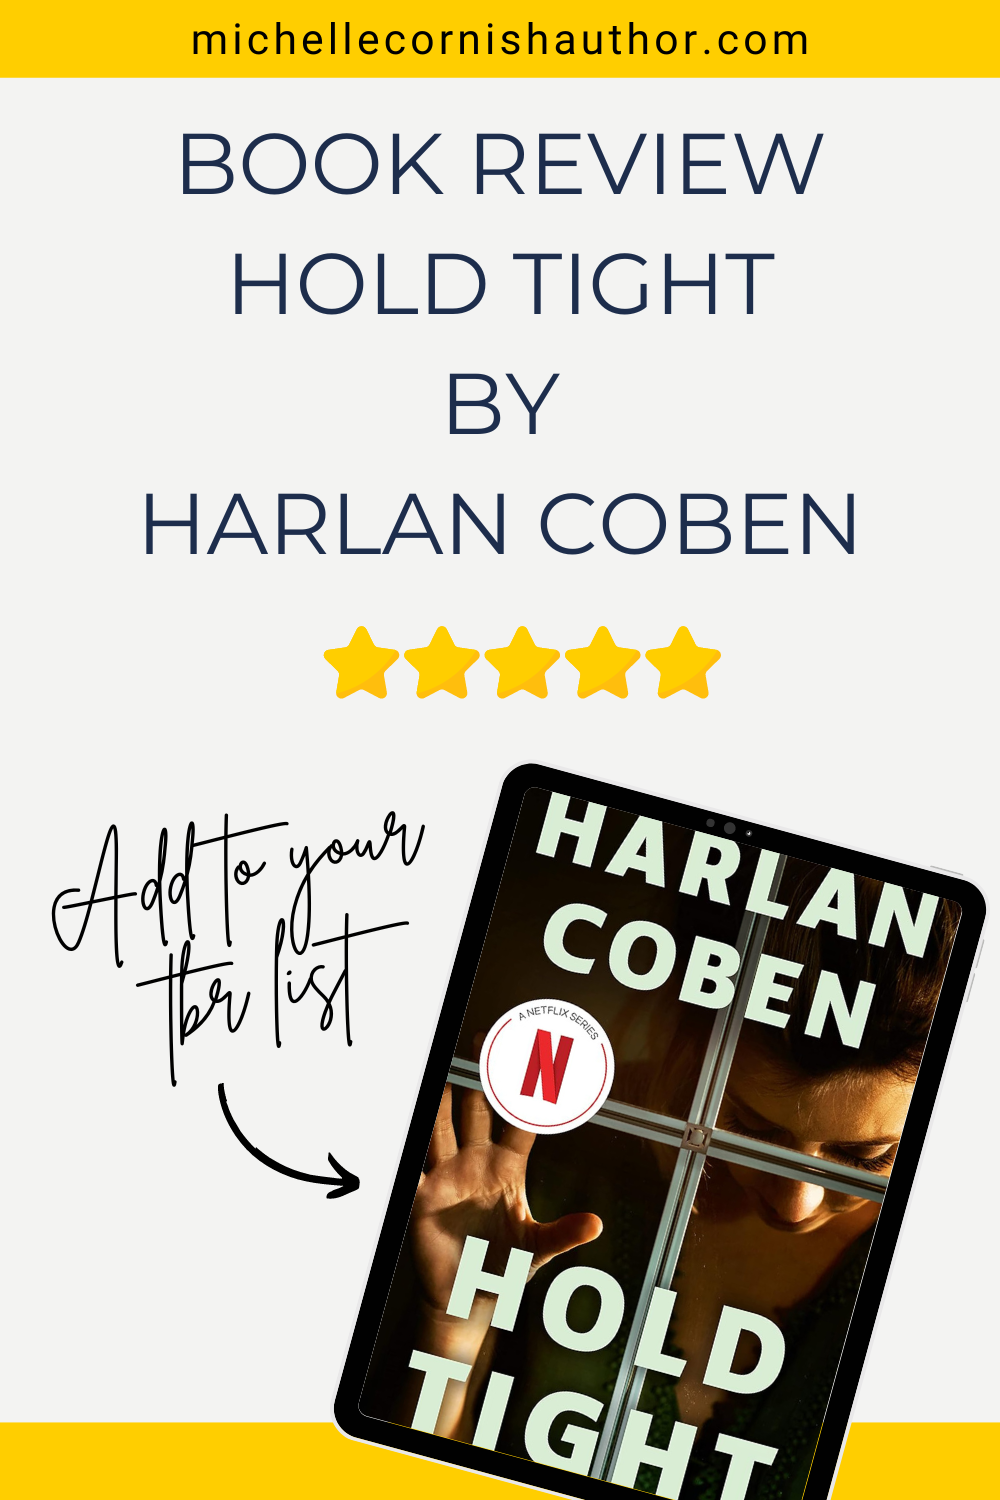 Book Review of Hold Tight by Harlan Coben